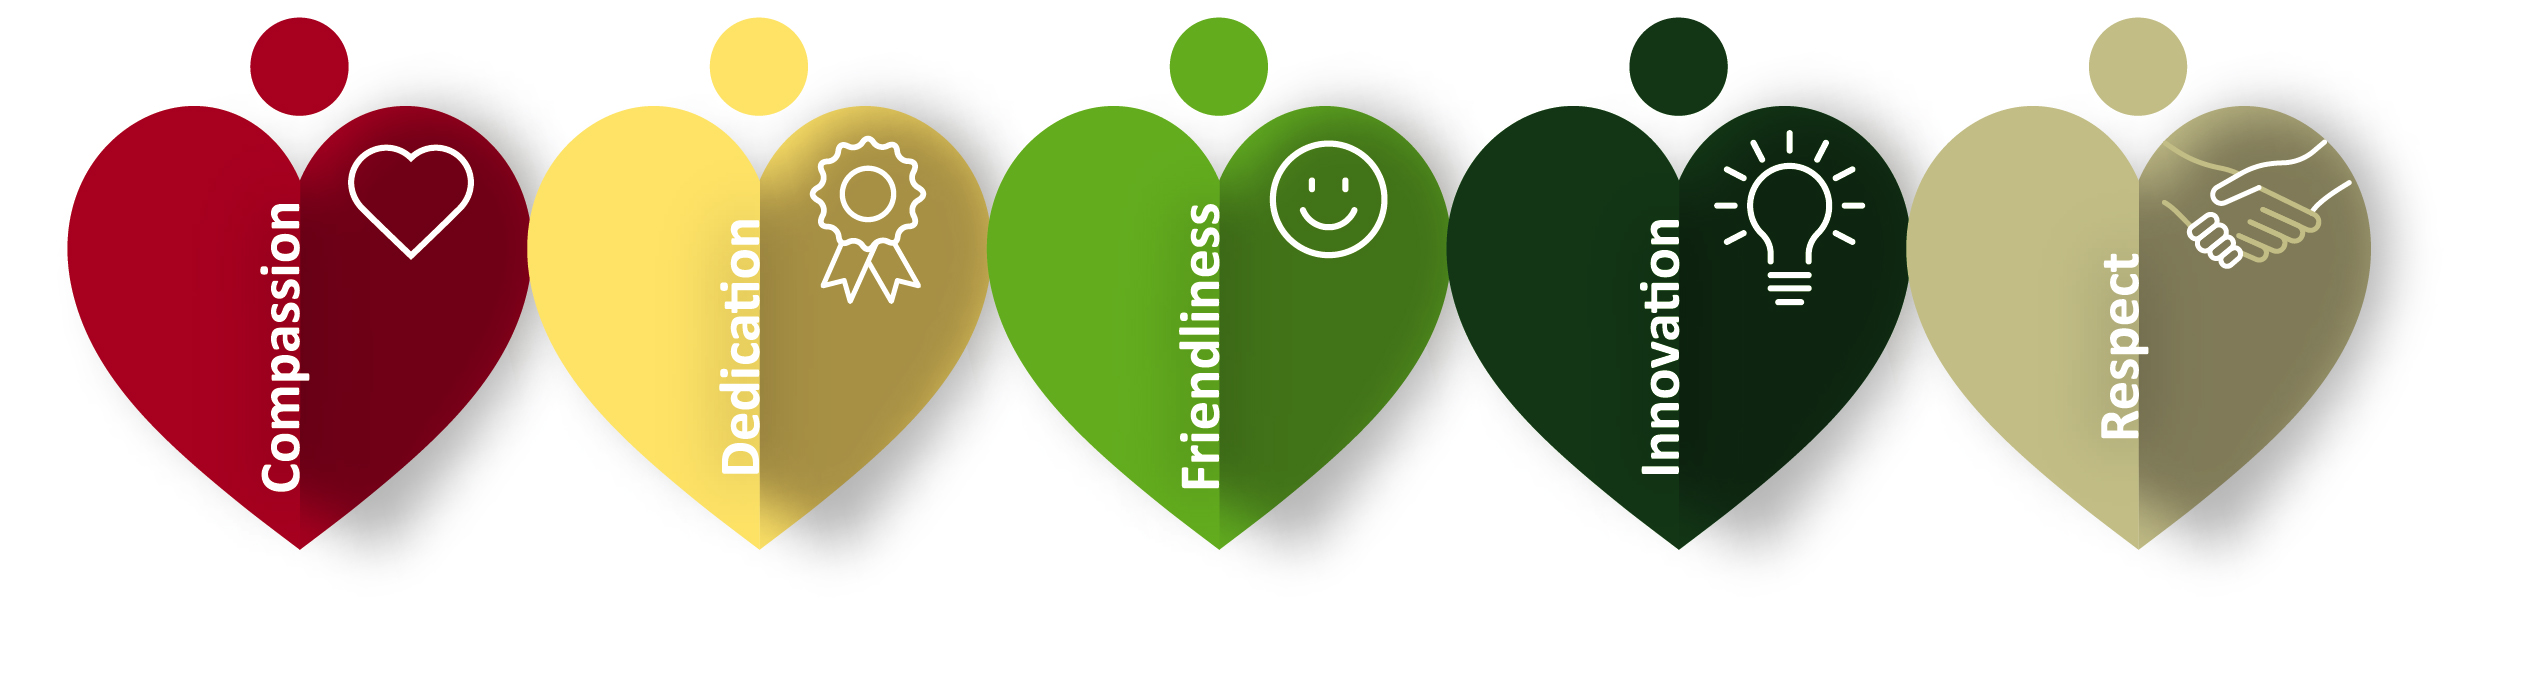 the five hearts of compassion, dedication, friendliness, innovation, and respect